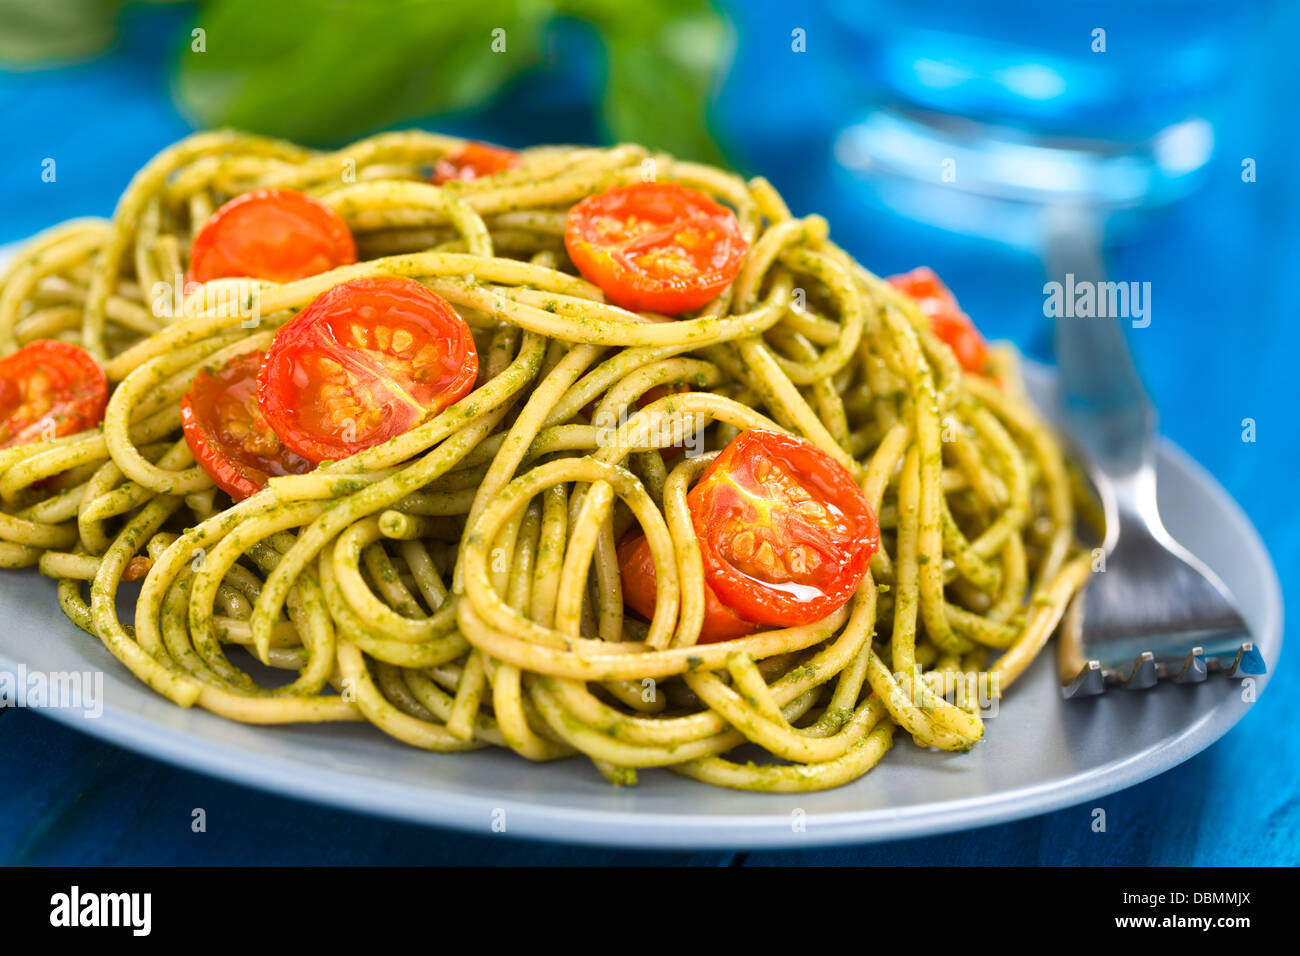 Spaghetti with pesto and baked cherry tomato halves served on a blue plate Stock Photo